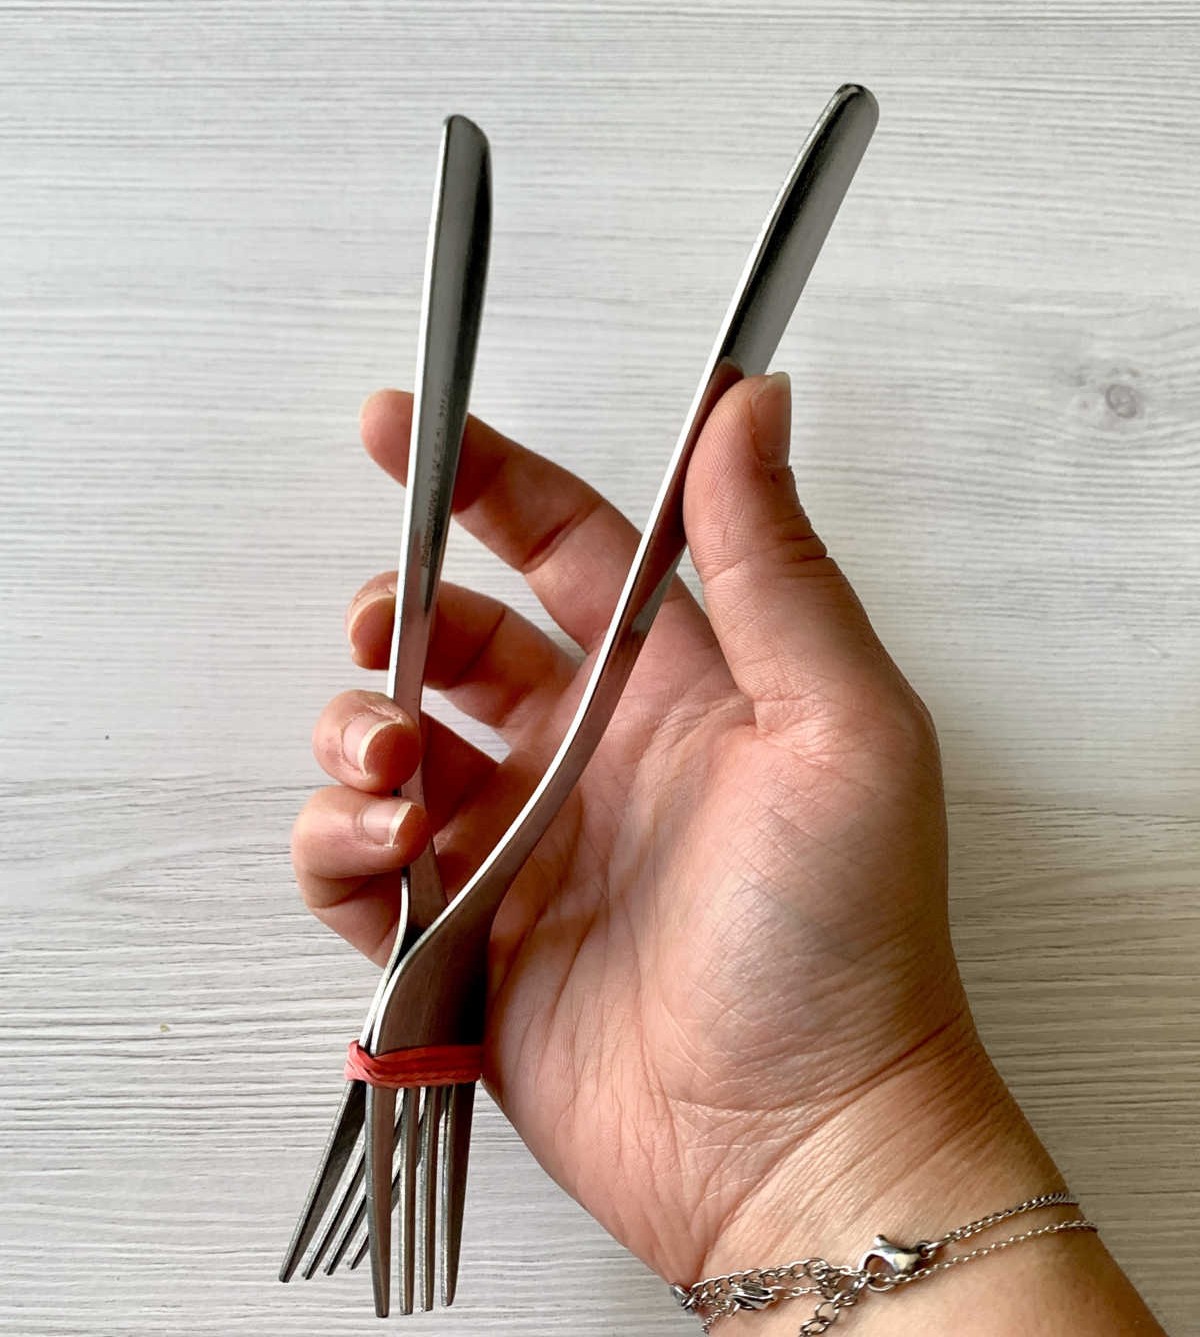 Tie Two Forks Together with a Rubber Band to Make a Pair of Tong